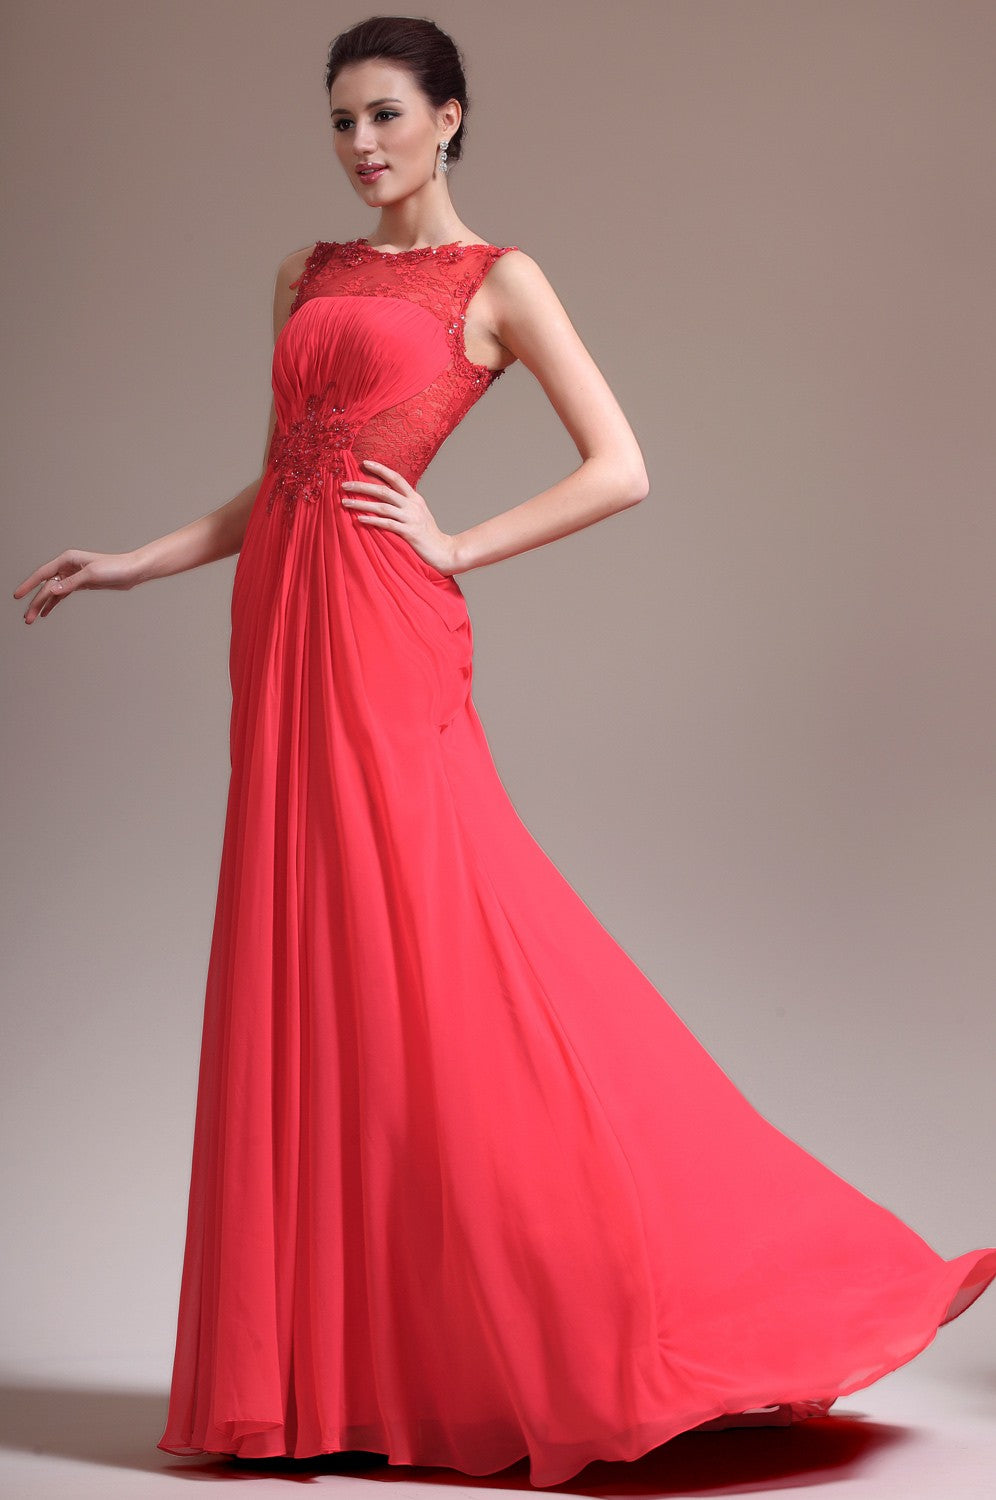 Red Chiffon And lace Mother Bridesmaid Formal Dress(BDJT1351)